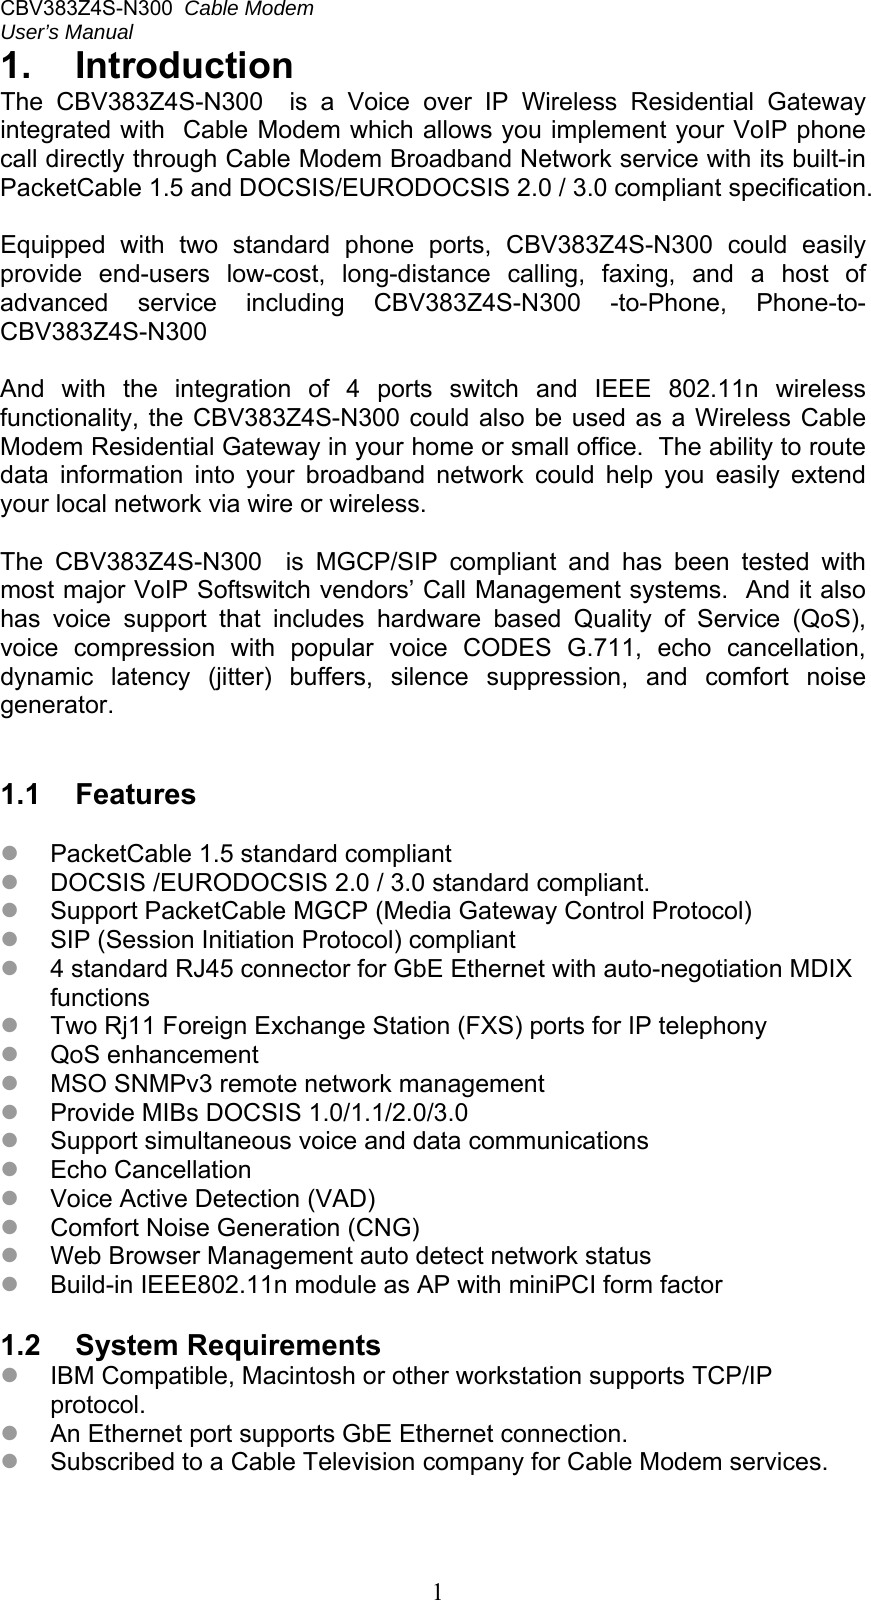 CBV383Z4S-N300  Cable Modem  User’s Manual   11.  Introduction The  CBV383Z4S-N300    is  a  Voice  over  IP  Wireless  Residential  Gateway integrated with  Cable Modem which allows you implement your VoIP phone call directly through Cable Modem Broadband Network service with its built-in PacketCable 1.5 and DOCSIS/EURODOCSIS 2.0 / 3.0 compliant specification.  Equipped  with  two  standard  phone  ports,  CBV383Z4S-N300  could  easily provide  end-users  low-cost,  long-distance  calling,  faxing,  and  a  host  of advanced  service  including  CBV383Z4S-N300  -to-Phone,  Phone-to- CBV383Z4S-N300  And  with  the  integration  of  4  ports  switch  and  IEEE  802.11n  wireless functionality, the  CBV383Z4S-N300  could also  be used as  a Wireless Cable Modem Residential Gateway in your home or small office.  The ability to route data  information  into  your  broadband  network  could  help  you  easily  extend your local network via wire or wireless.  The  CBV383Z4S-N300    is  MGCP/SIP  compliant  and  has  been  tested  with most major VoIP Softswitch vendors’ Call Management systems.  And it also has  voice  support  that  includes  hardware  based  Quality  of  Service  (QoS), voice  compression  with  popular  voice  CODES  G.711,  echo  cancellation, dynamic  latency  (jitter)  buffers,  silence  suppression,  and  comfort  noise generator.   1.1  Features   PacketCable 1.5 standard compliant  DOCSIS /EURODOCSIS 2.0 / 3.0 standard compliant.  Support PacketCable MGCP (Media Gateway Control Protocol)  SIP (Session Initiation Protocol) compliant  4 standard RJ45 connector for GbE Ethernet with auto-negotiation MDIX functions  Two Rj11 Foreign Exchange Station (FXS) ports for IP telephony  QoS enhancement  MSO SNMPv3 remote network management  Provide MIBs DOCSIS 1.0/1.1/2.0/3.0  Support simultaneous voice and data communications  Echo Cancellation  Voice Active Detection (VAD)  Comfort Noise Generation (CNG)  Web Browser Management auto detect network status  Build-in IEEE802.11n module as AP with miniPCI form factor  1.2  System Requirements  IBM Compatible, Macintosh or other workstation supports TCP/IP protocol.  An Ethernet port supports GbE Ethernet connection.  Subscribed to a Cable Television company for Cable Modem services.  